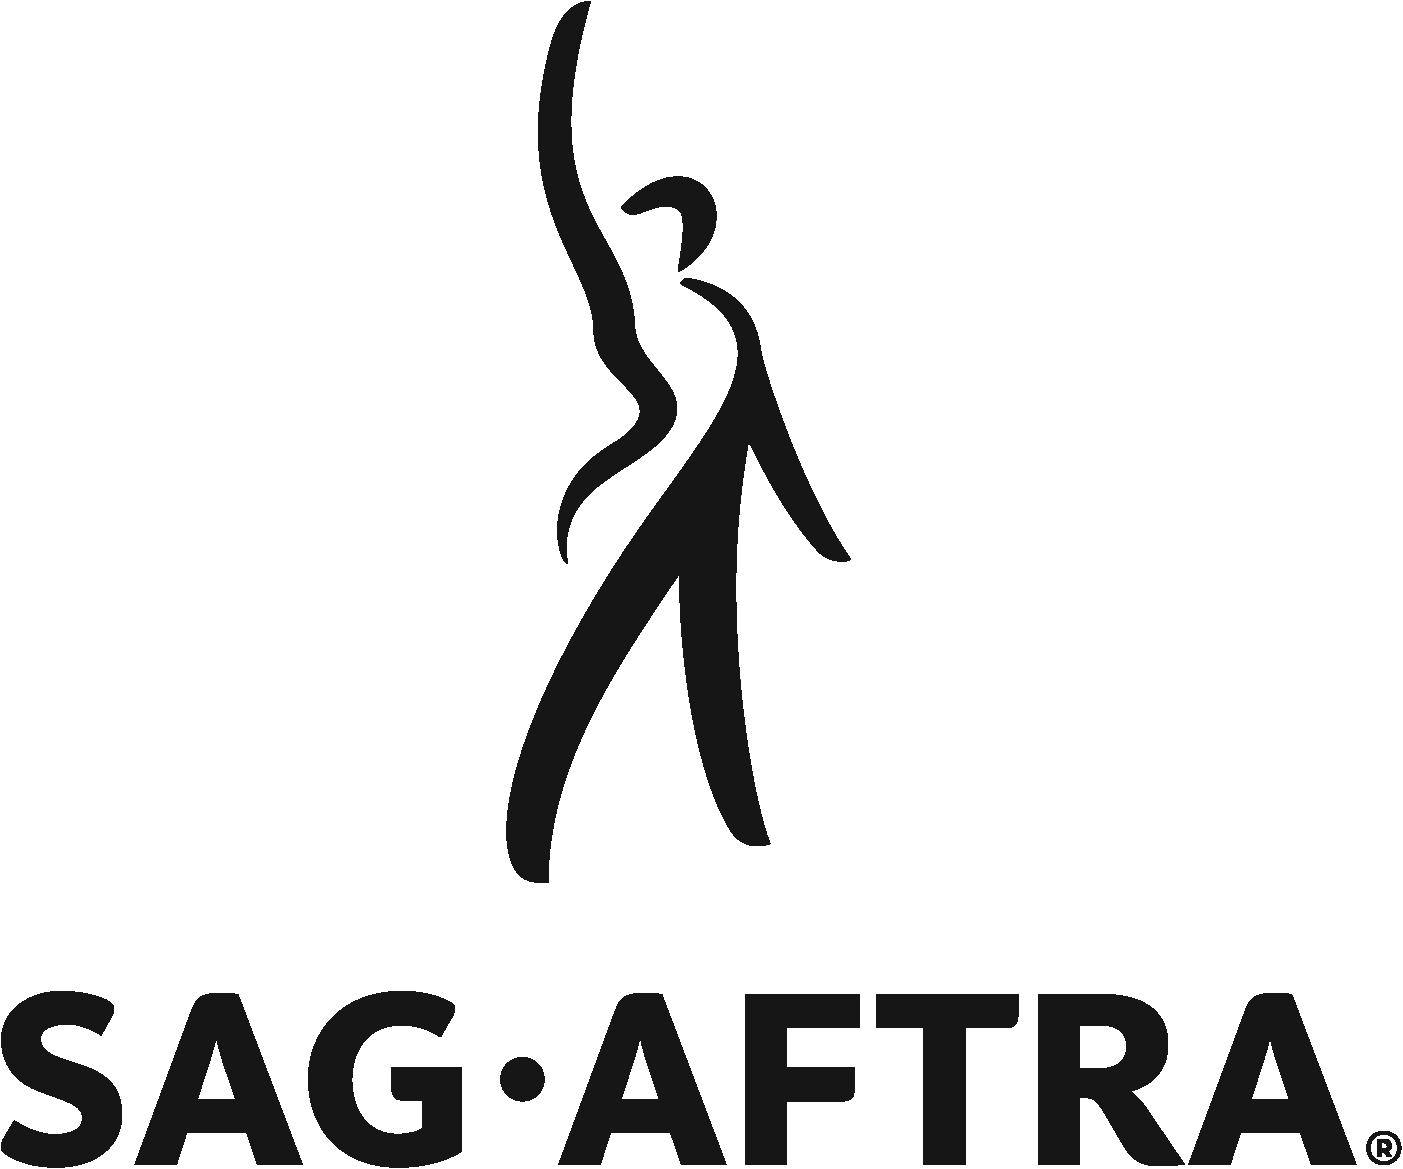 585-5850607_the-issue-sag-aftra-logo-png.png